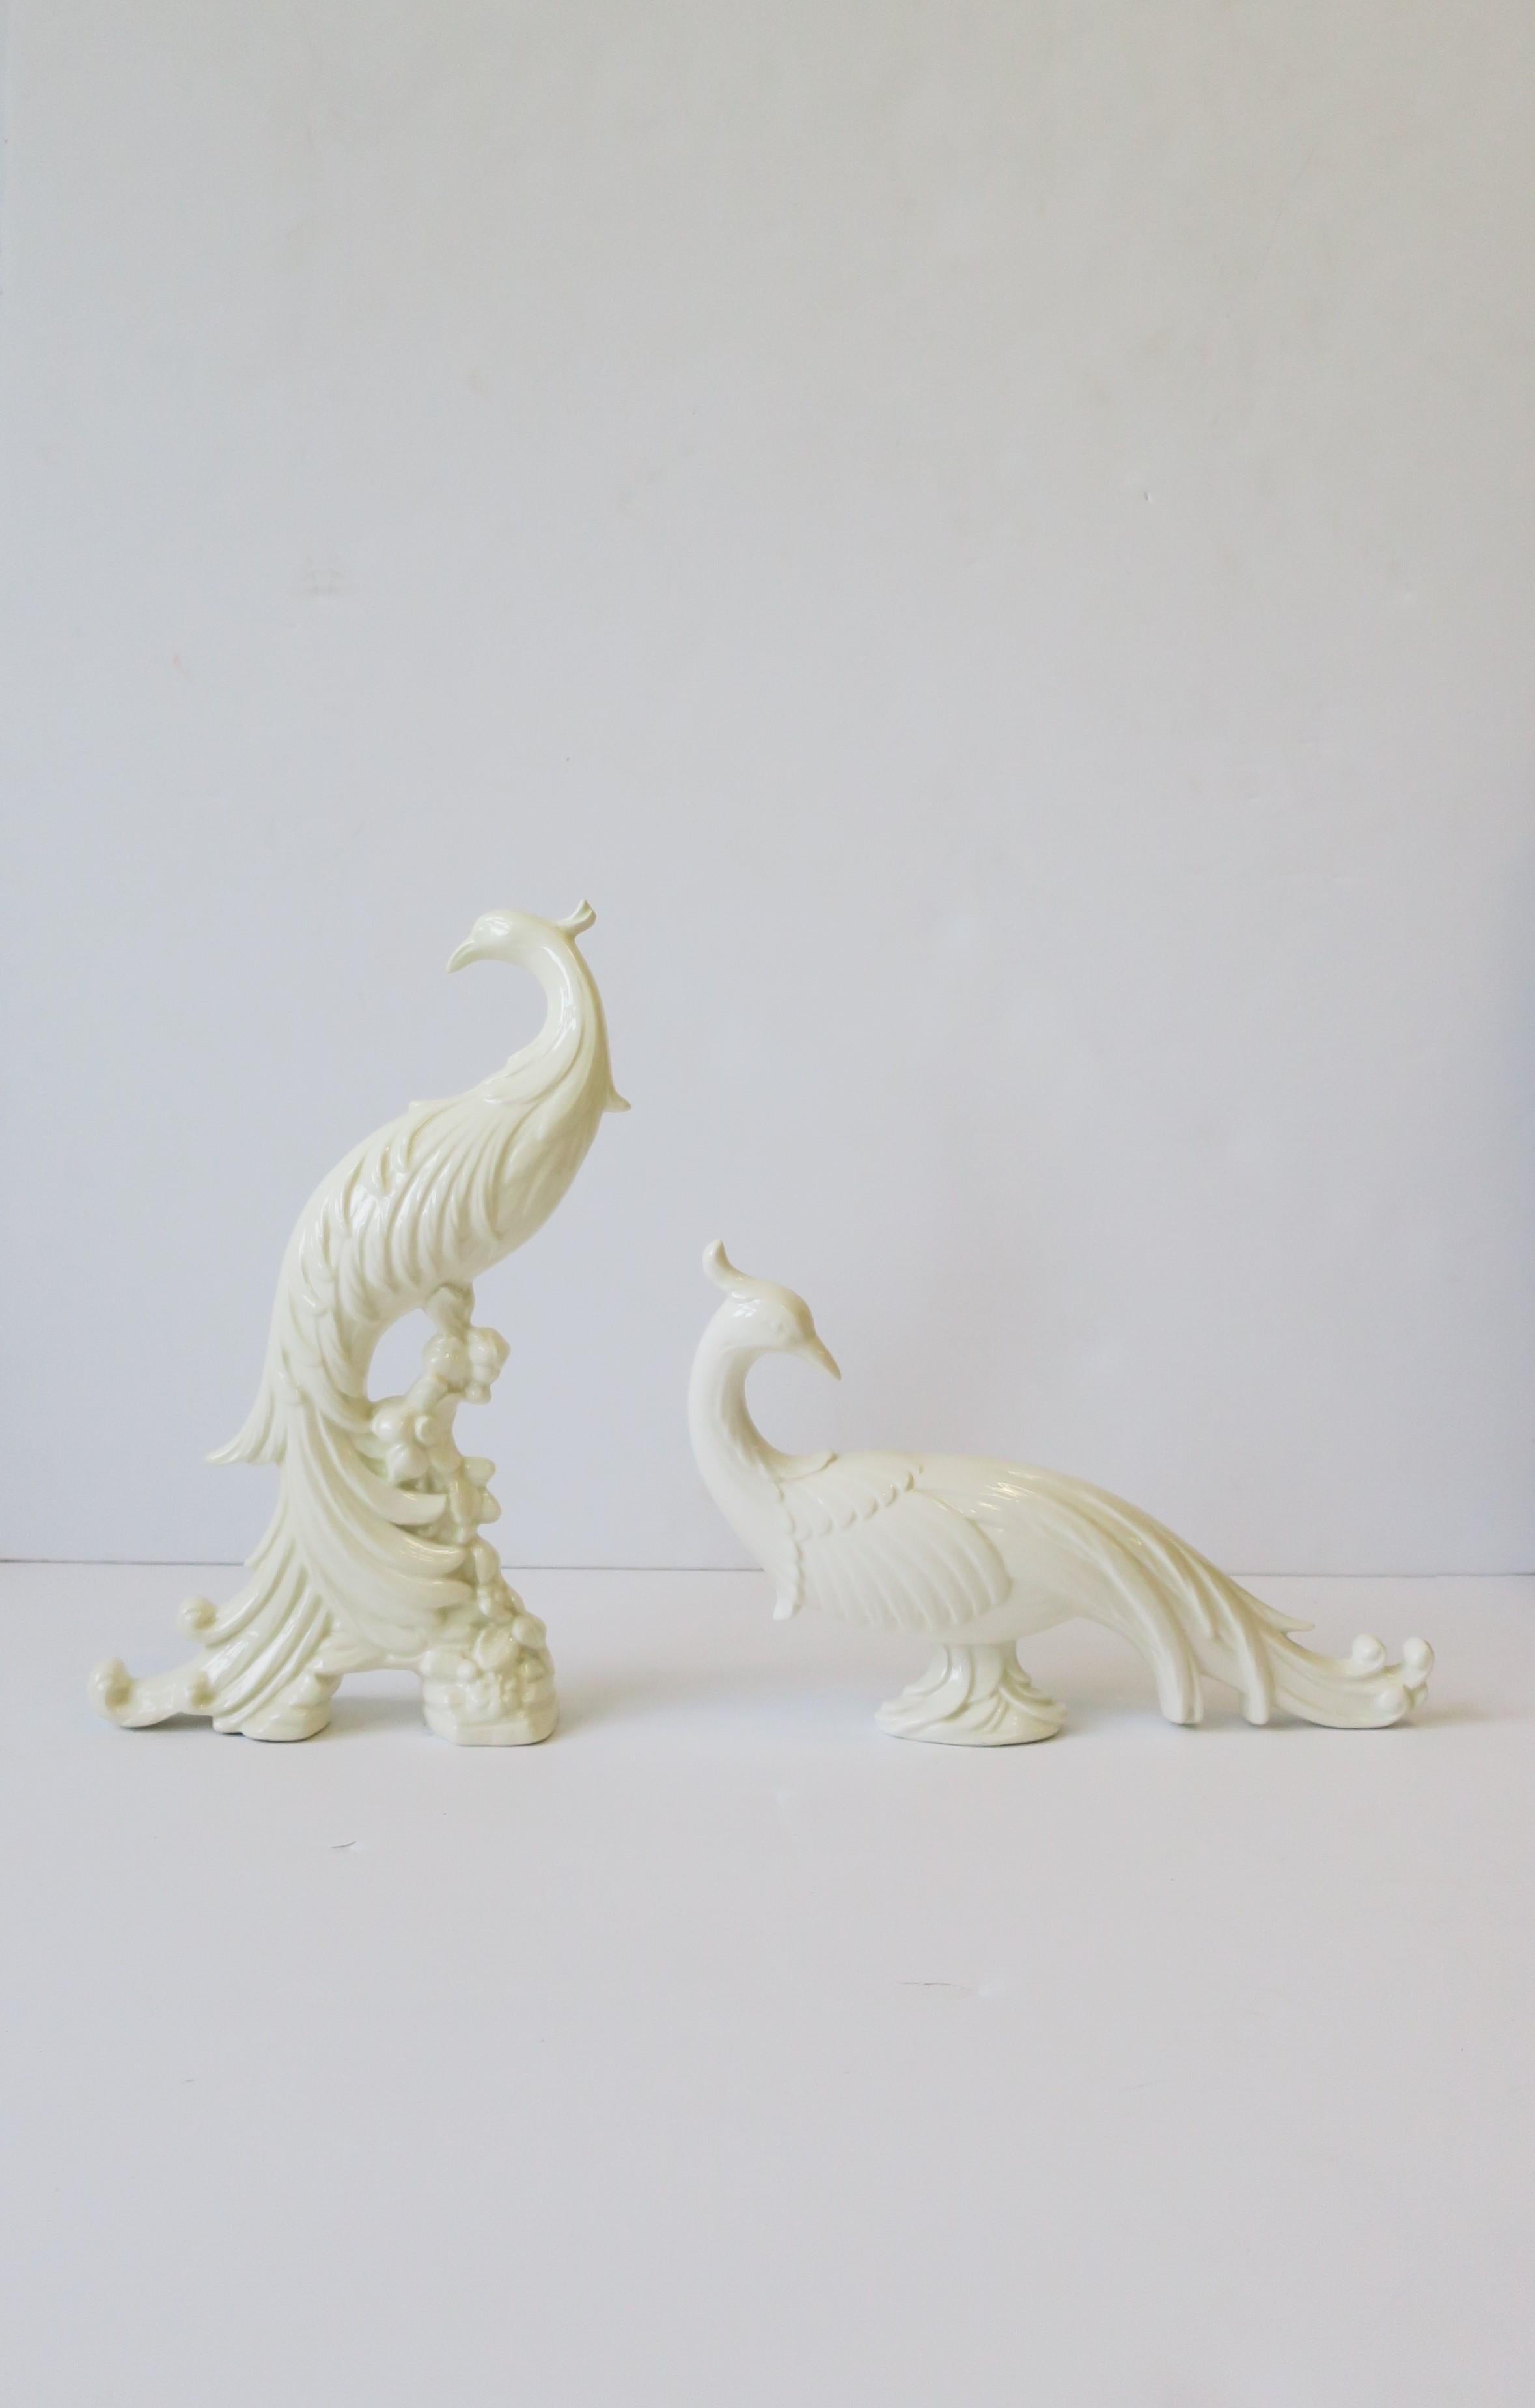 A pair of white ceramic Phoenix or Pheasant birds, circa 1960s. 

Measurements: from L to R
12.75